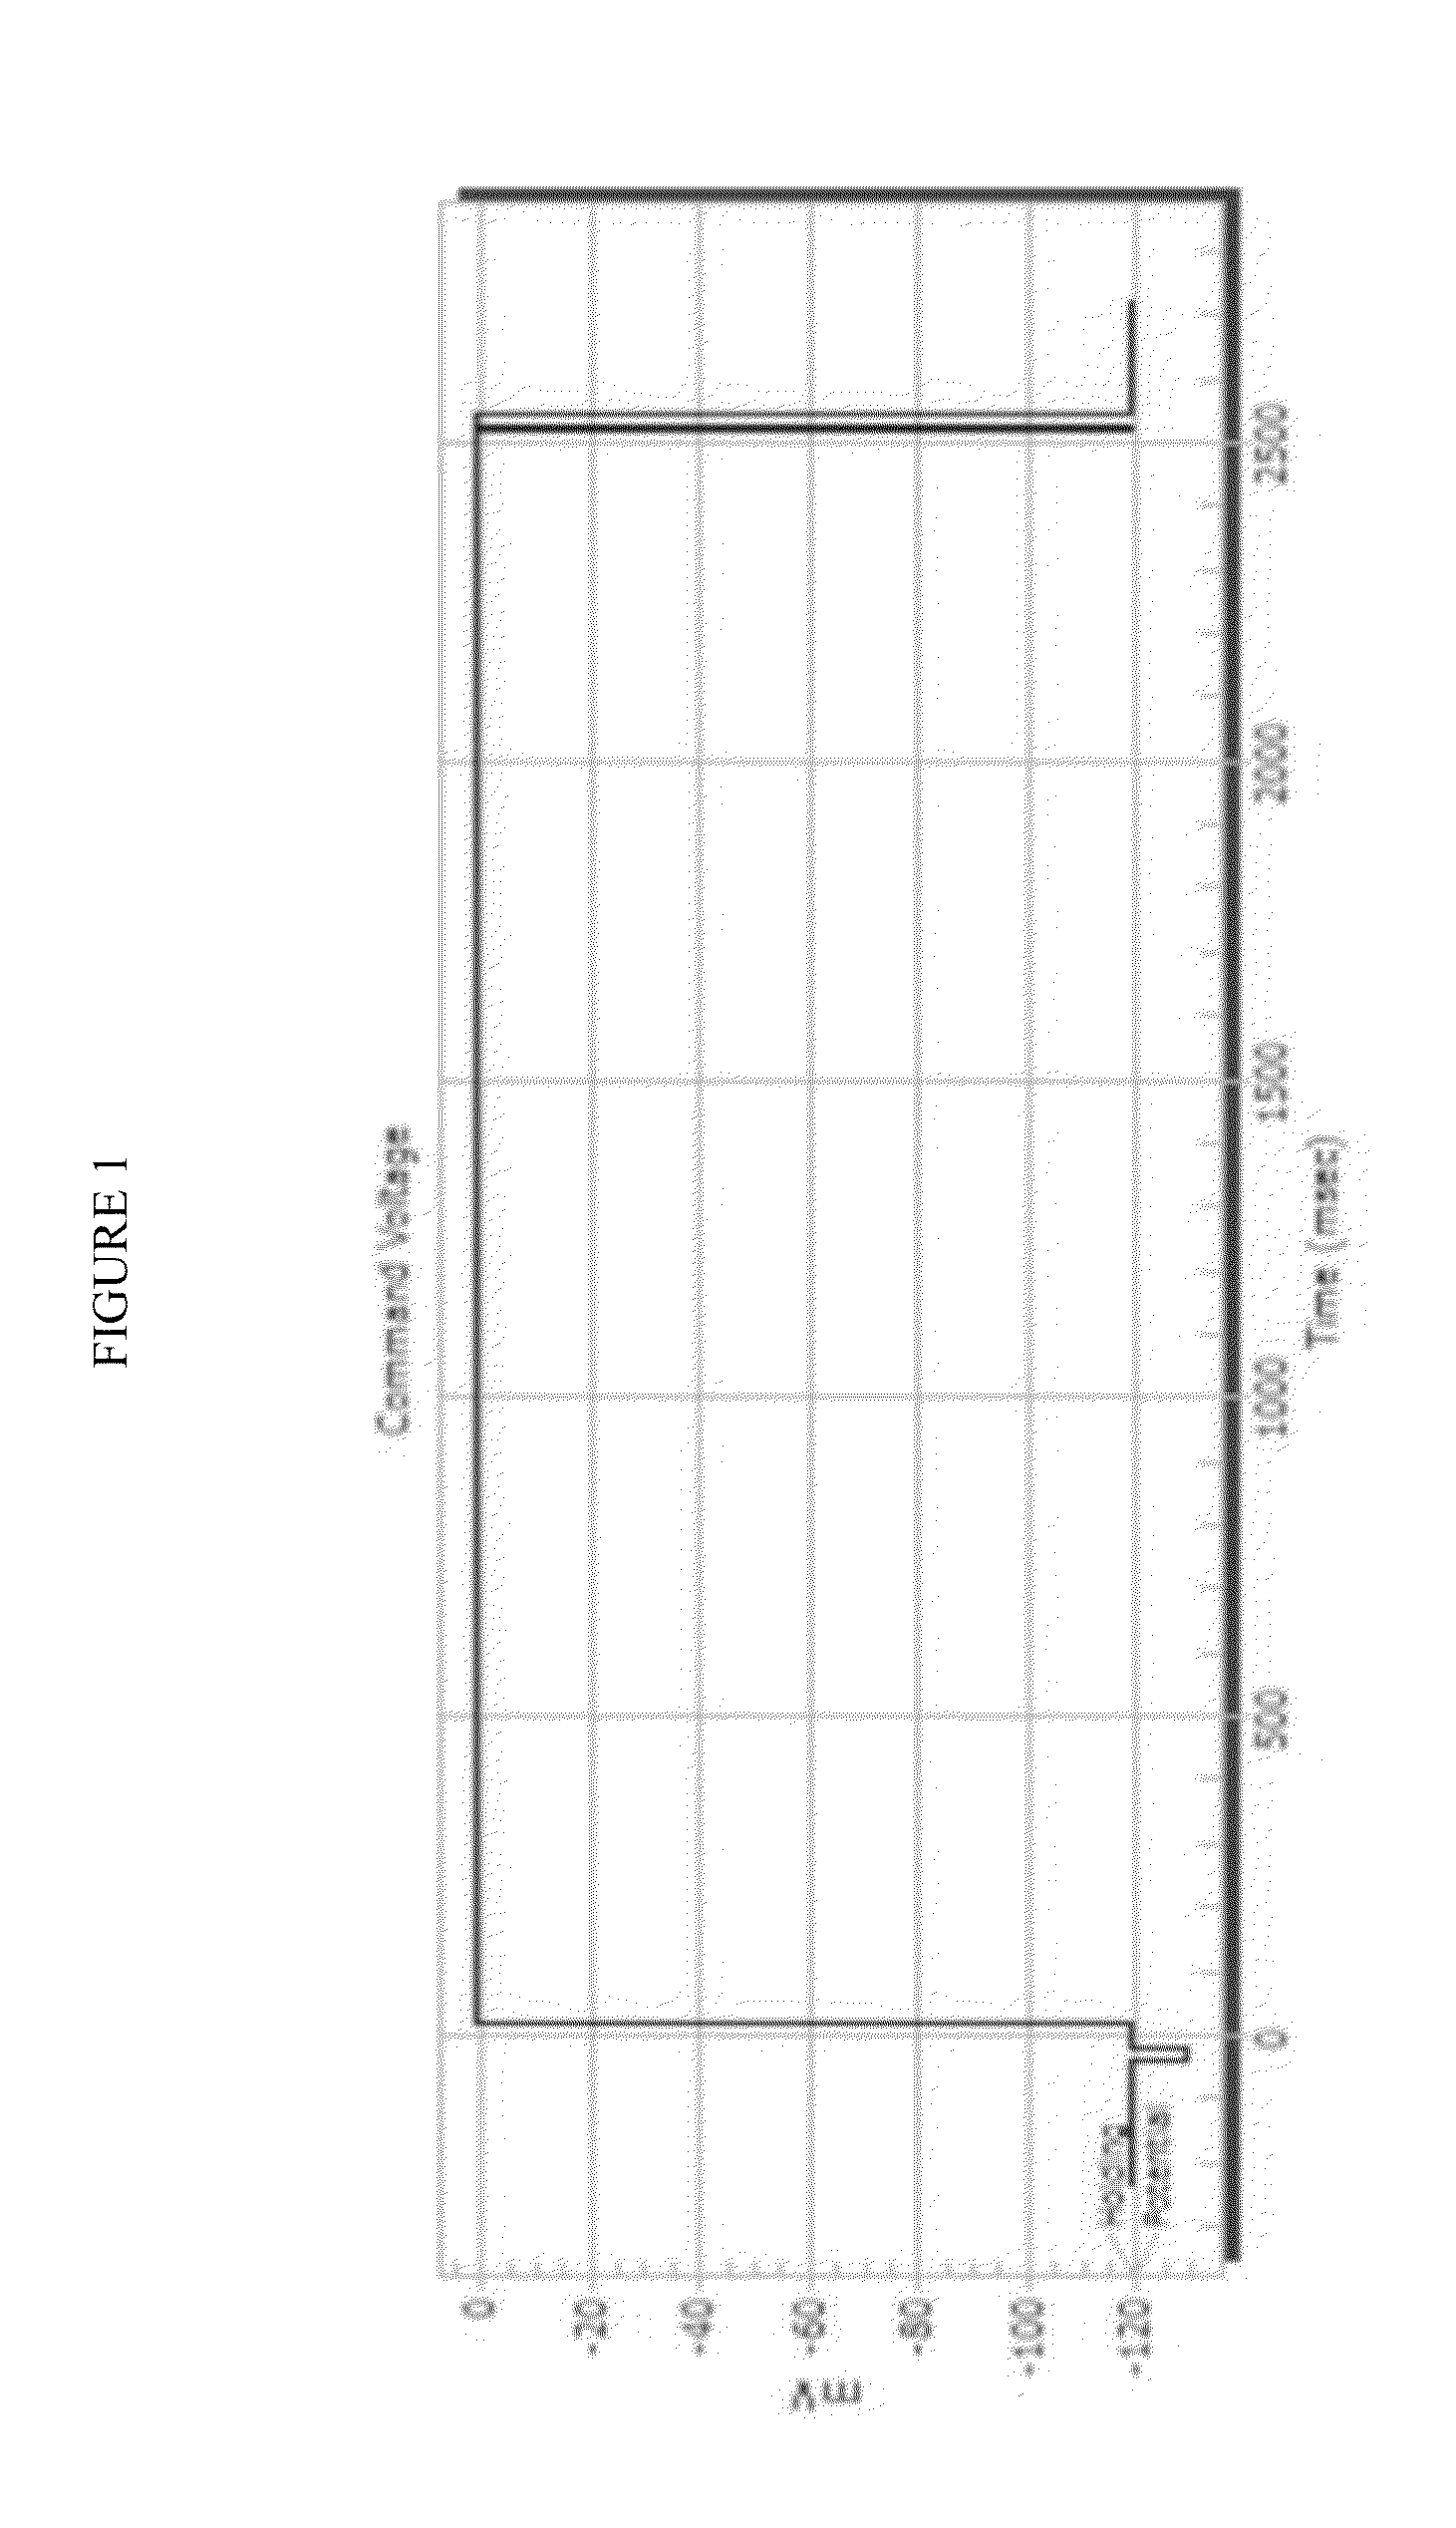 Heterocyclic compounds as nav channel inhibitors and uses thereof